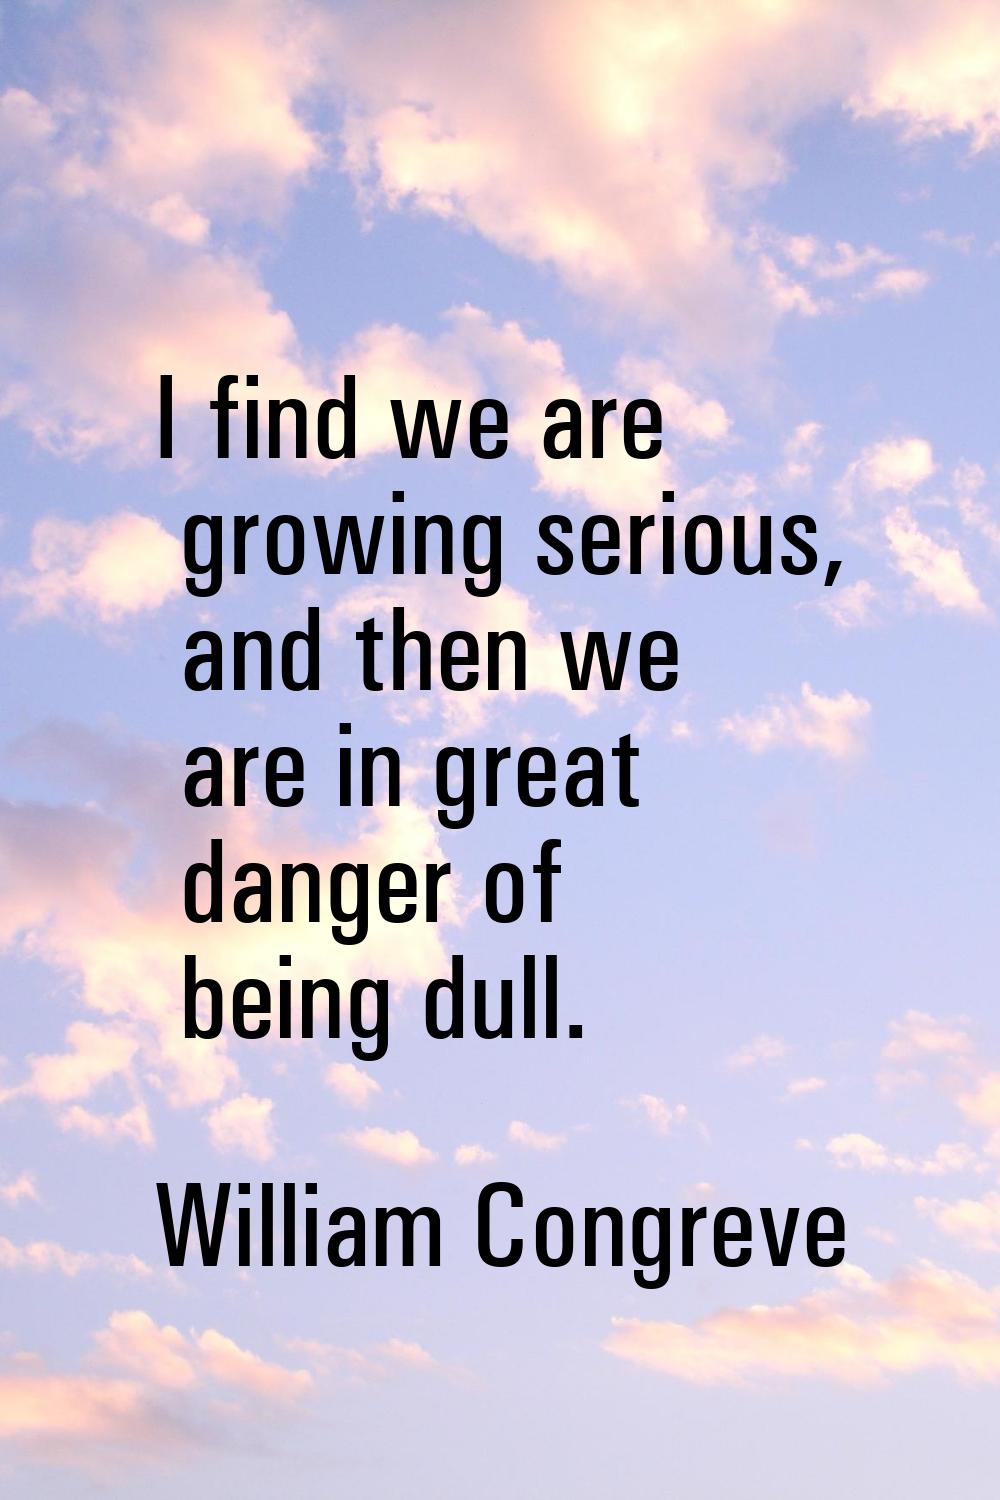 I find we are growing serious, and then we are in great danger of being dull.